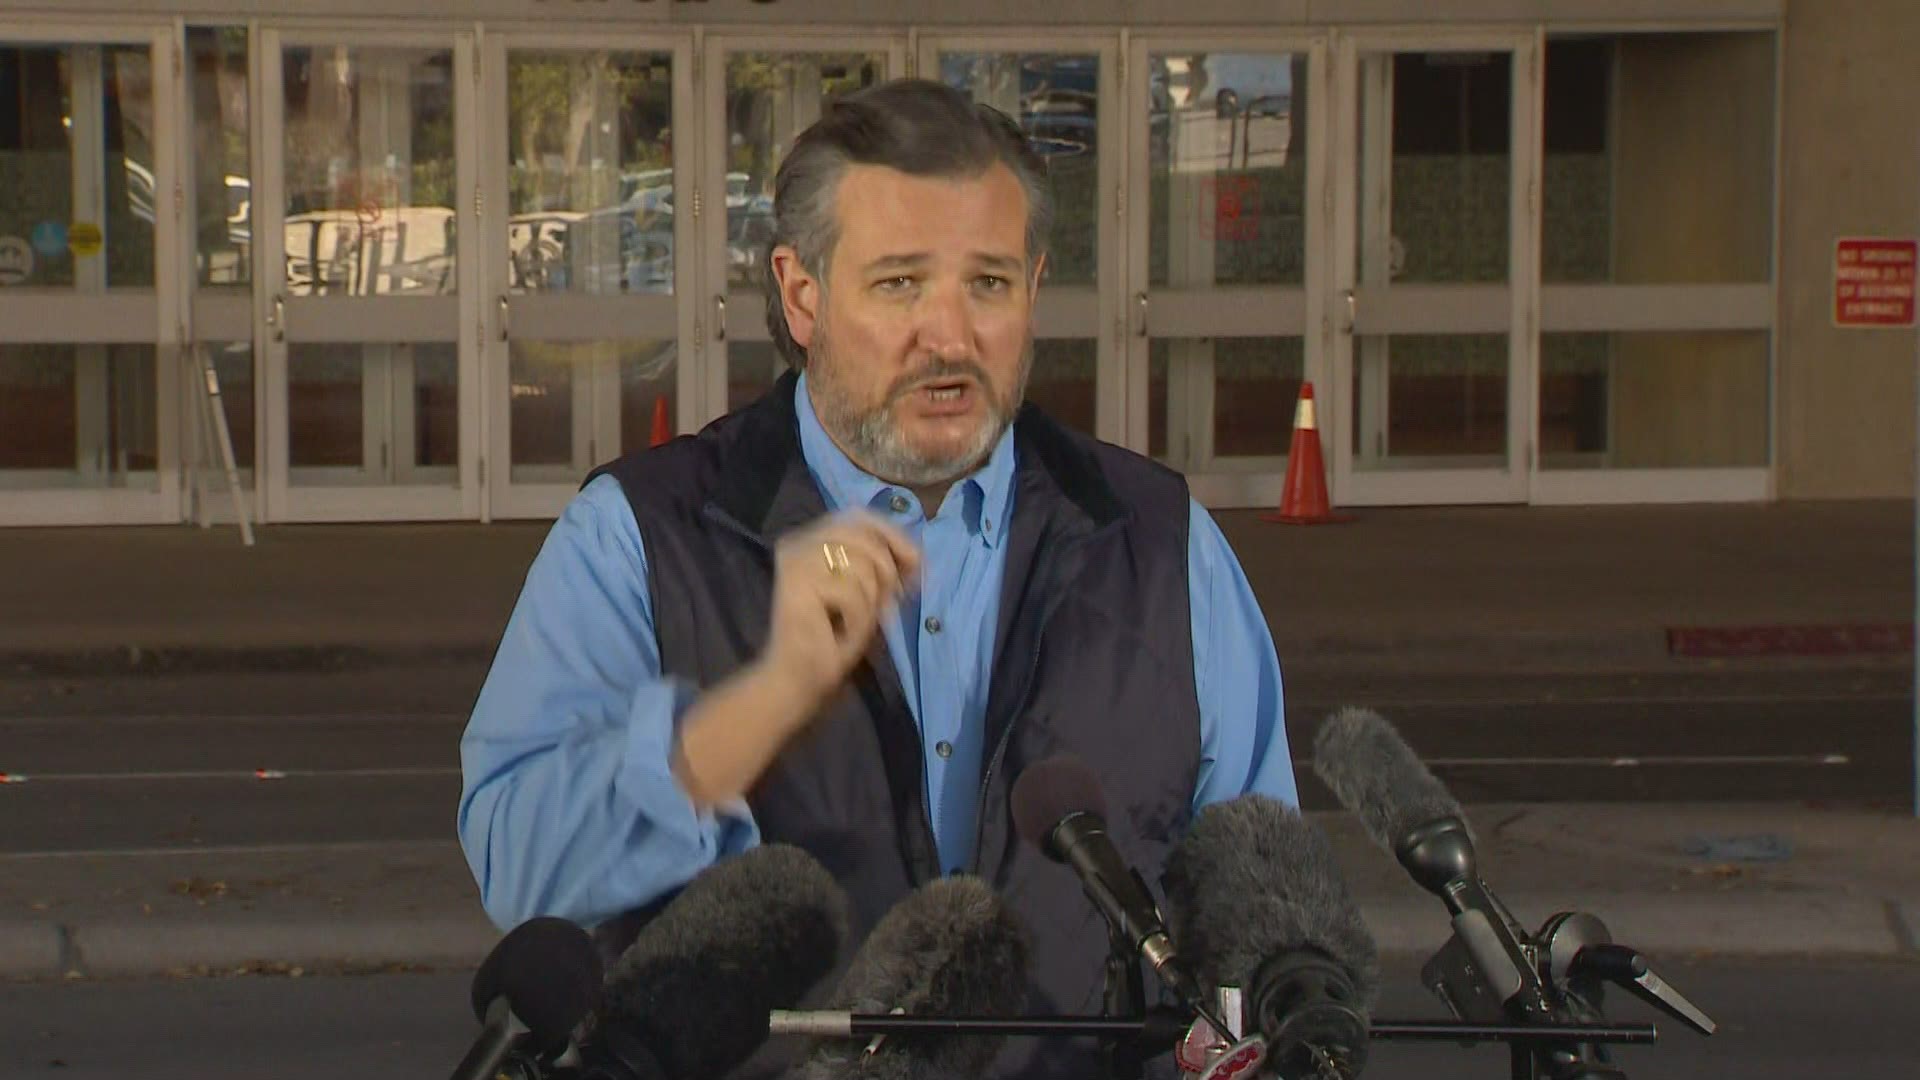 Cruz called the site "tragic," "horrific" and "entirely preventable."